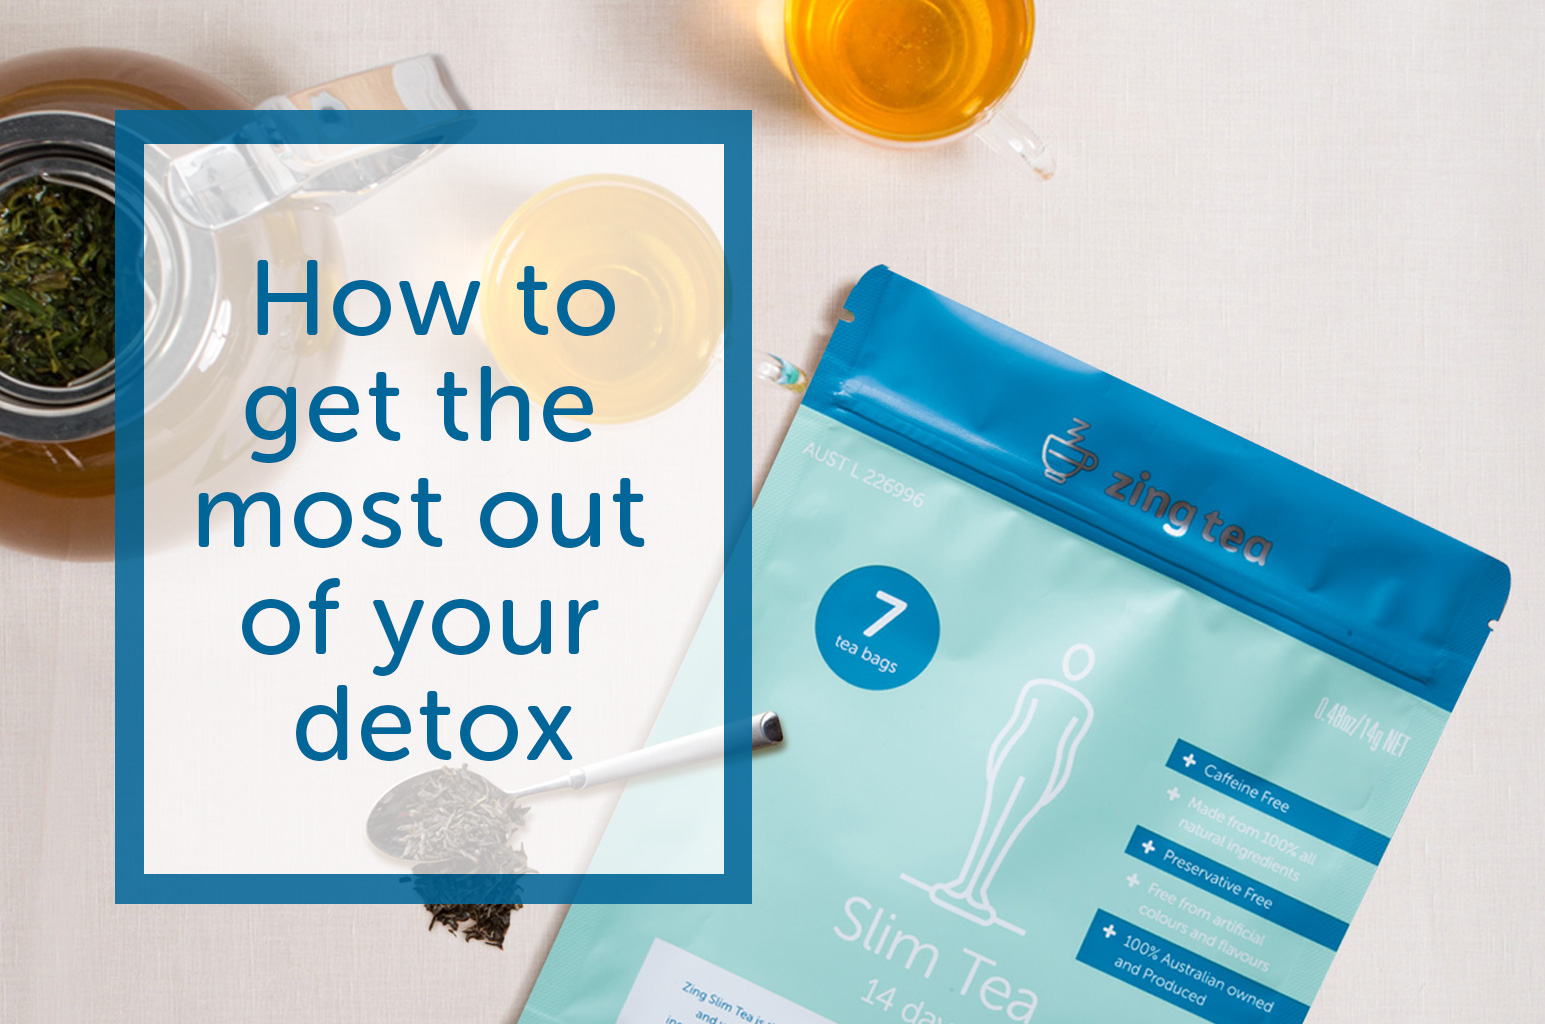 How to get the most out of your detox